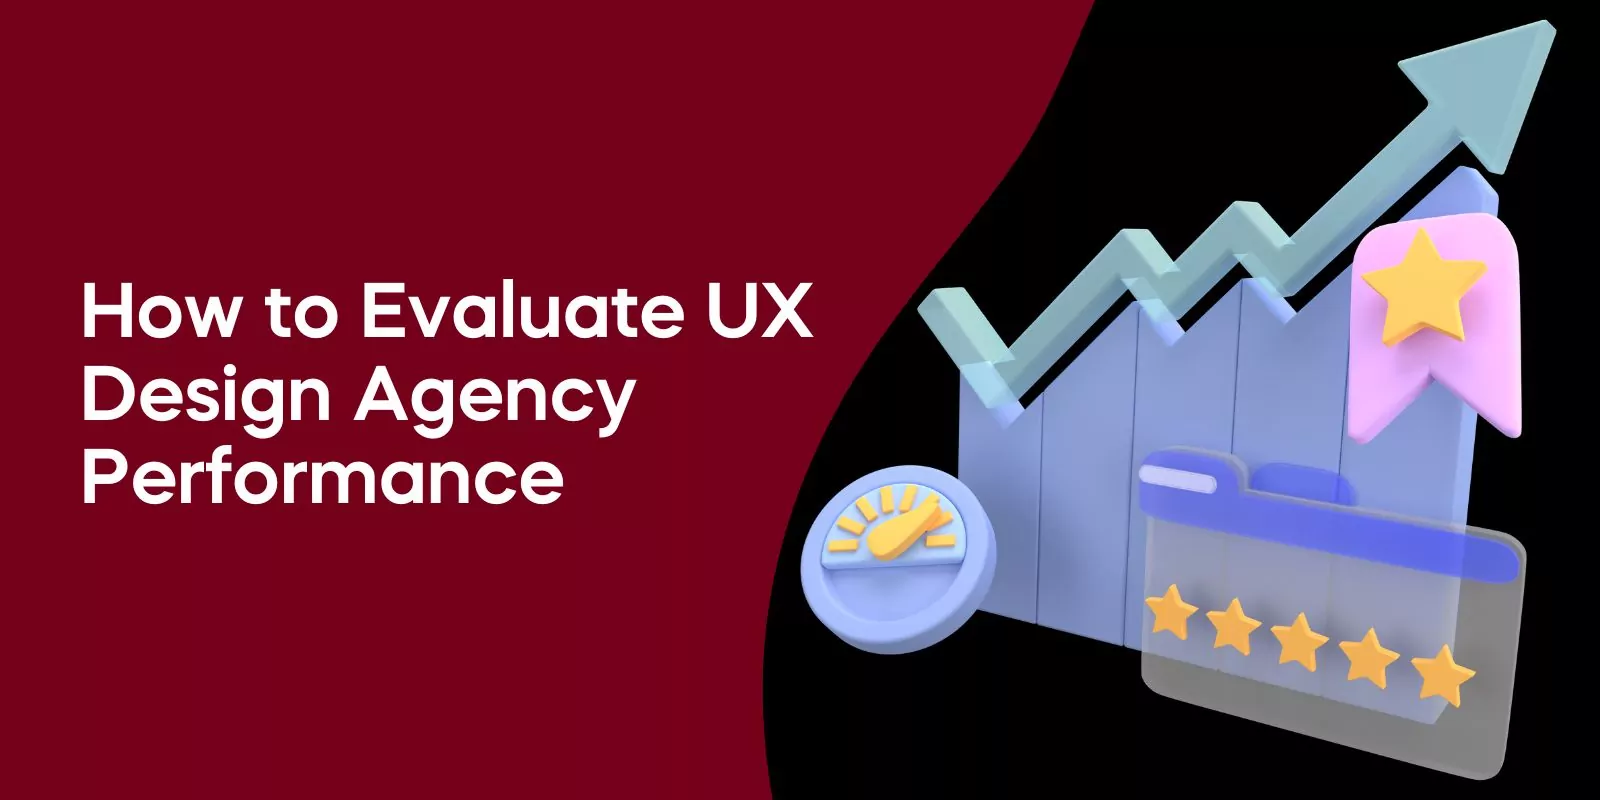 How to Evaluate UX Design Agency Performance